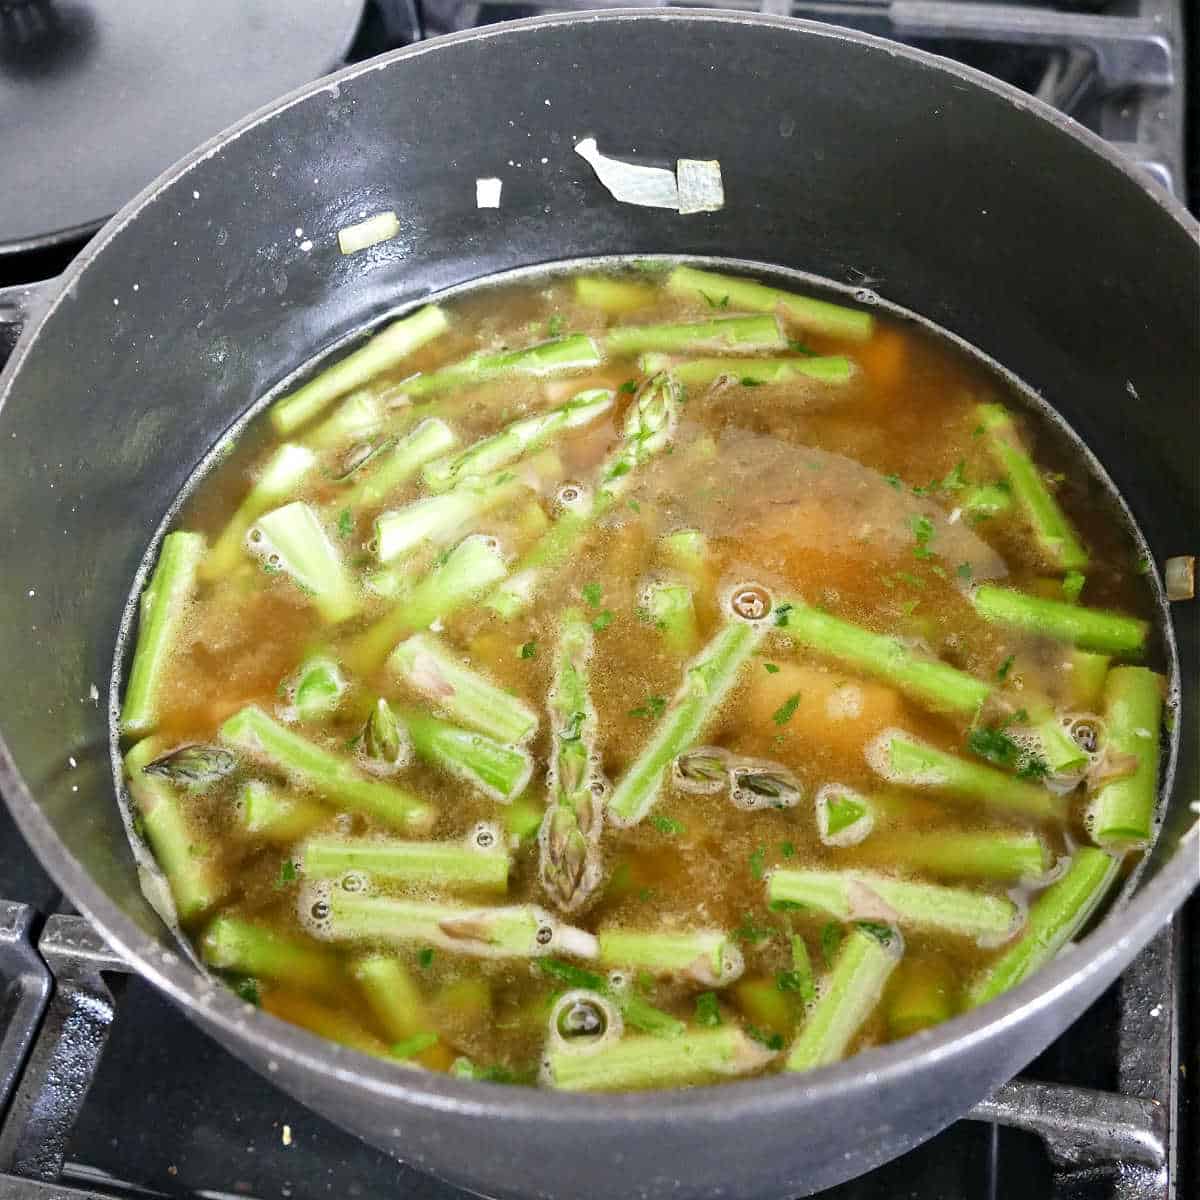 Cooking the asparagus in a large stock pot.